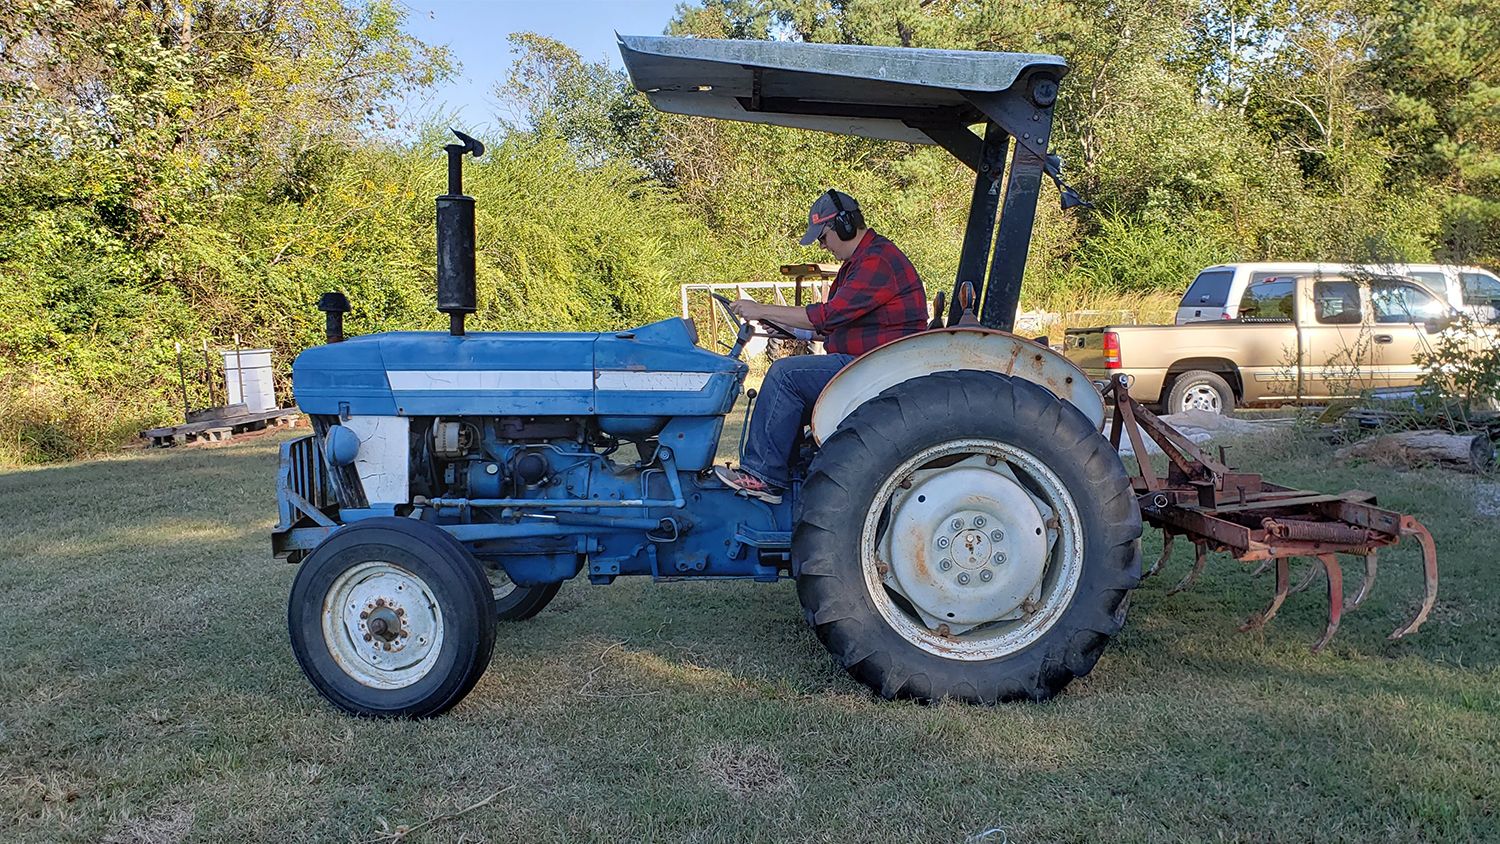 A woman on a large blue tractor.